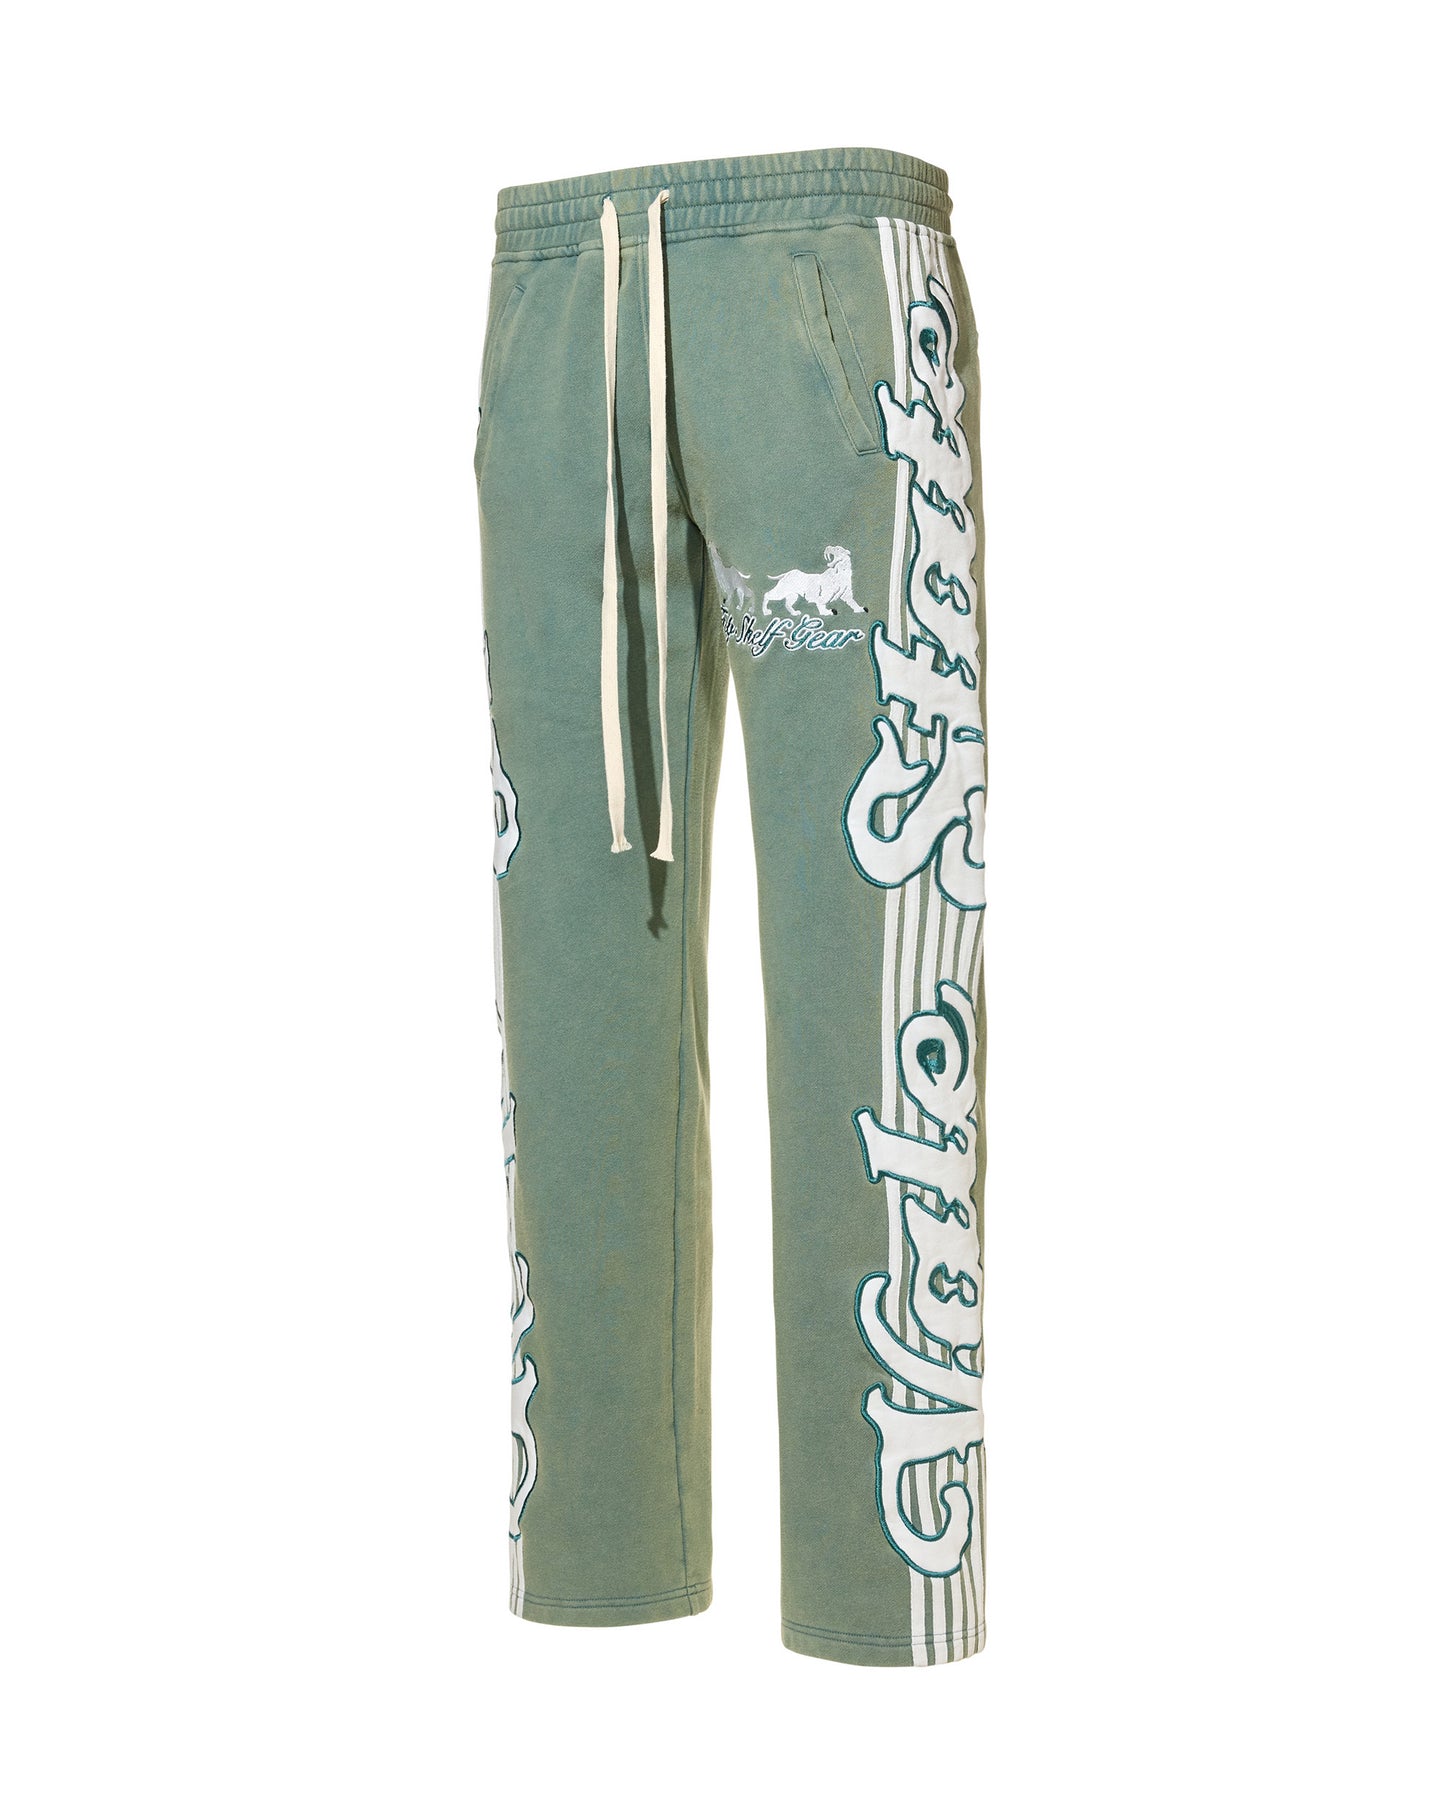 FOREST INSIGNIA SWEATS